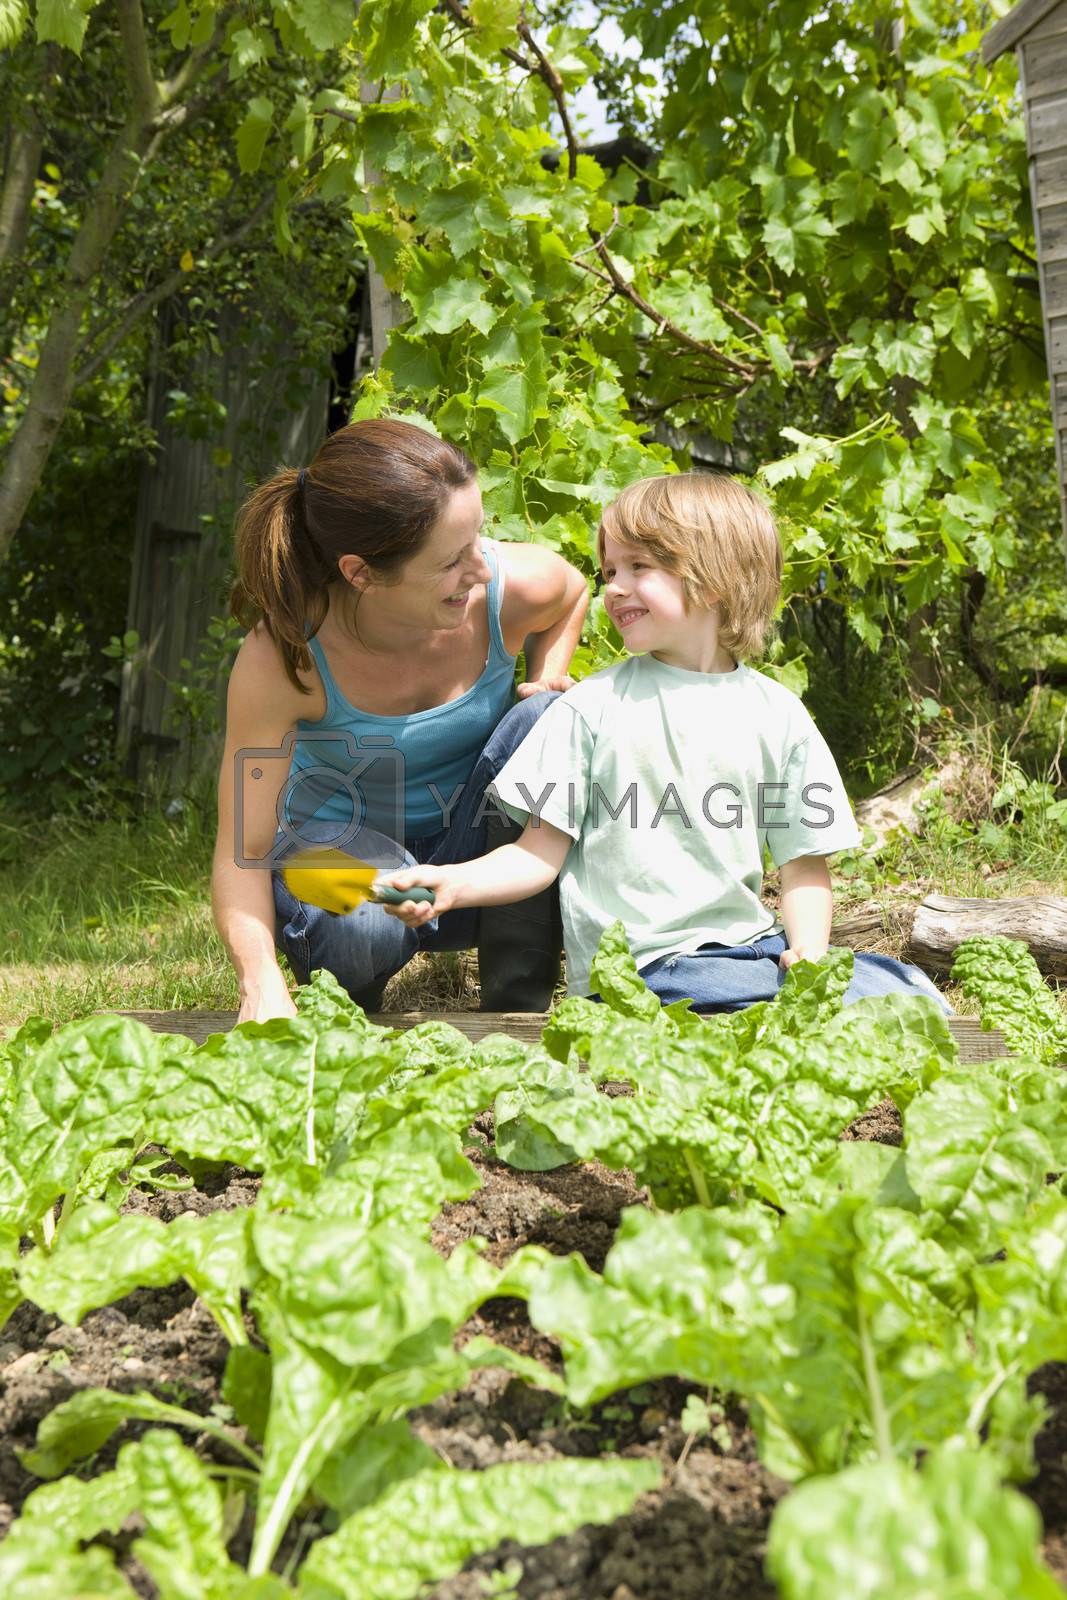 Royalty free image of Boy gardening with mother by moodboard